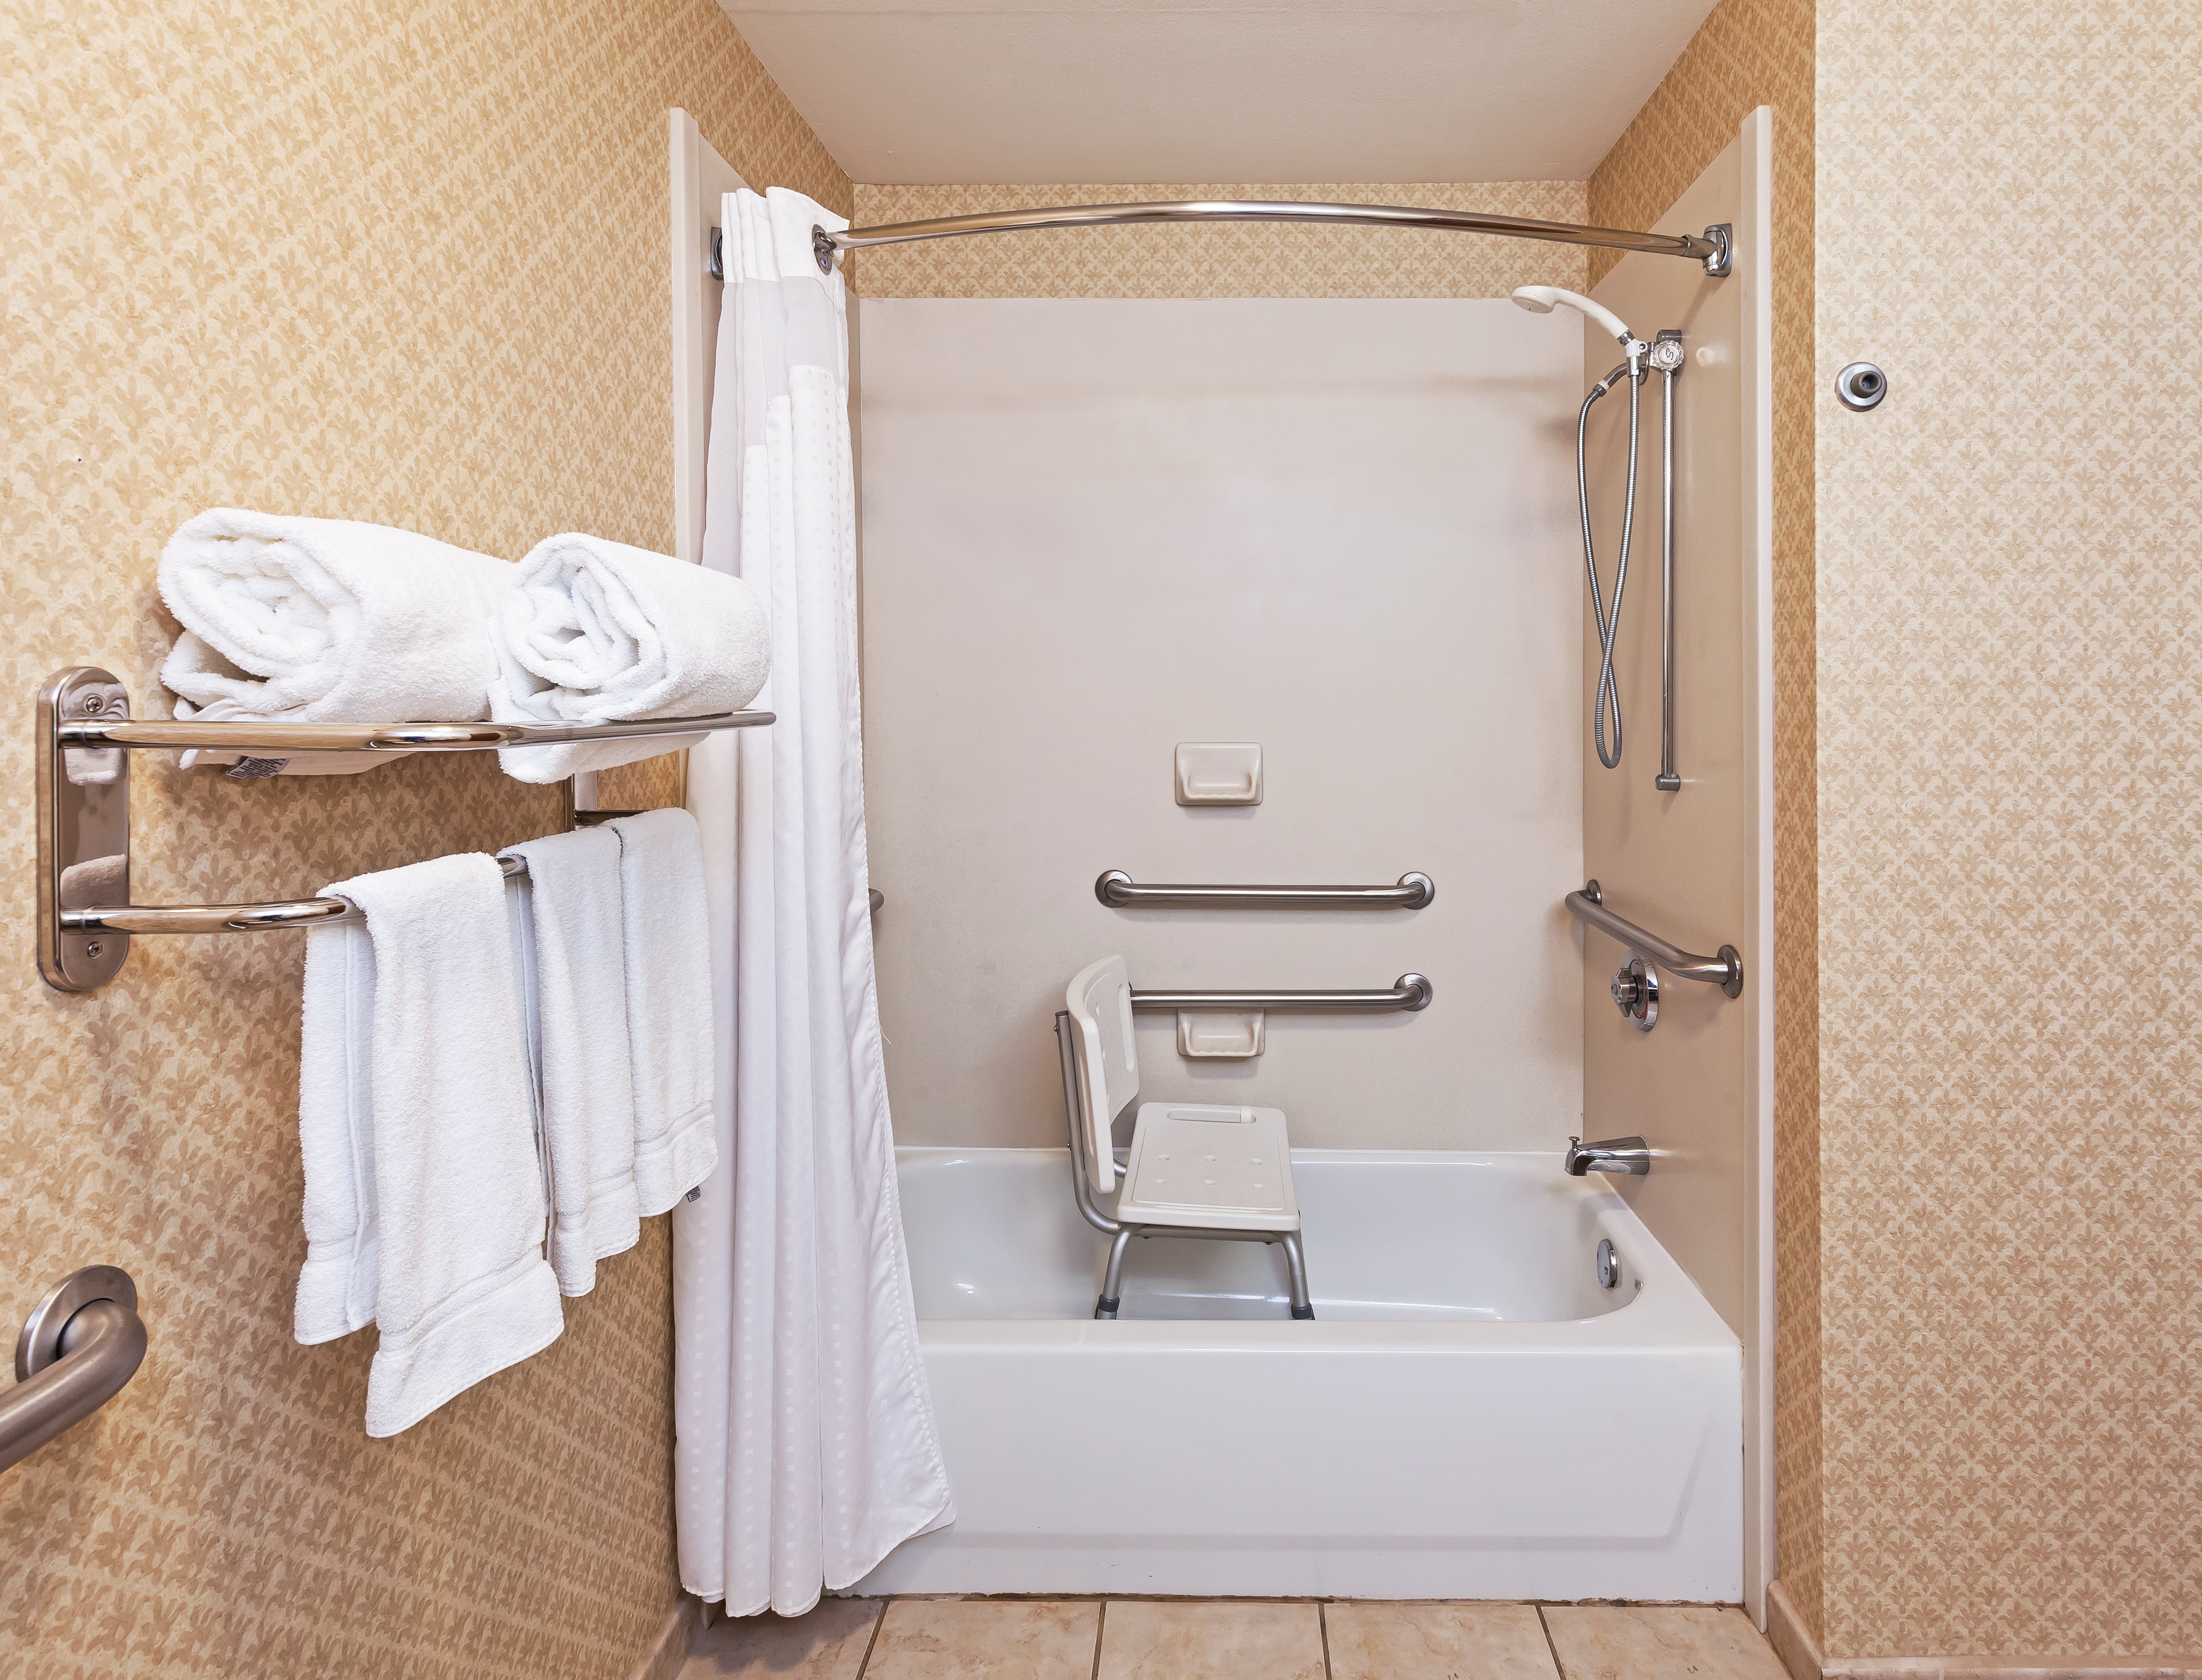 ADA/Handicap accessible Guest Bathroom with mobility tub